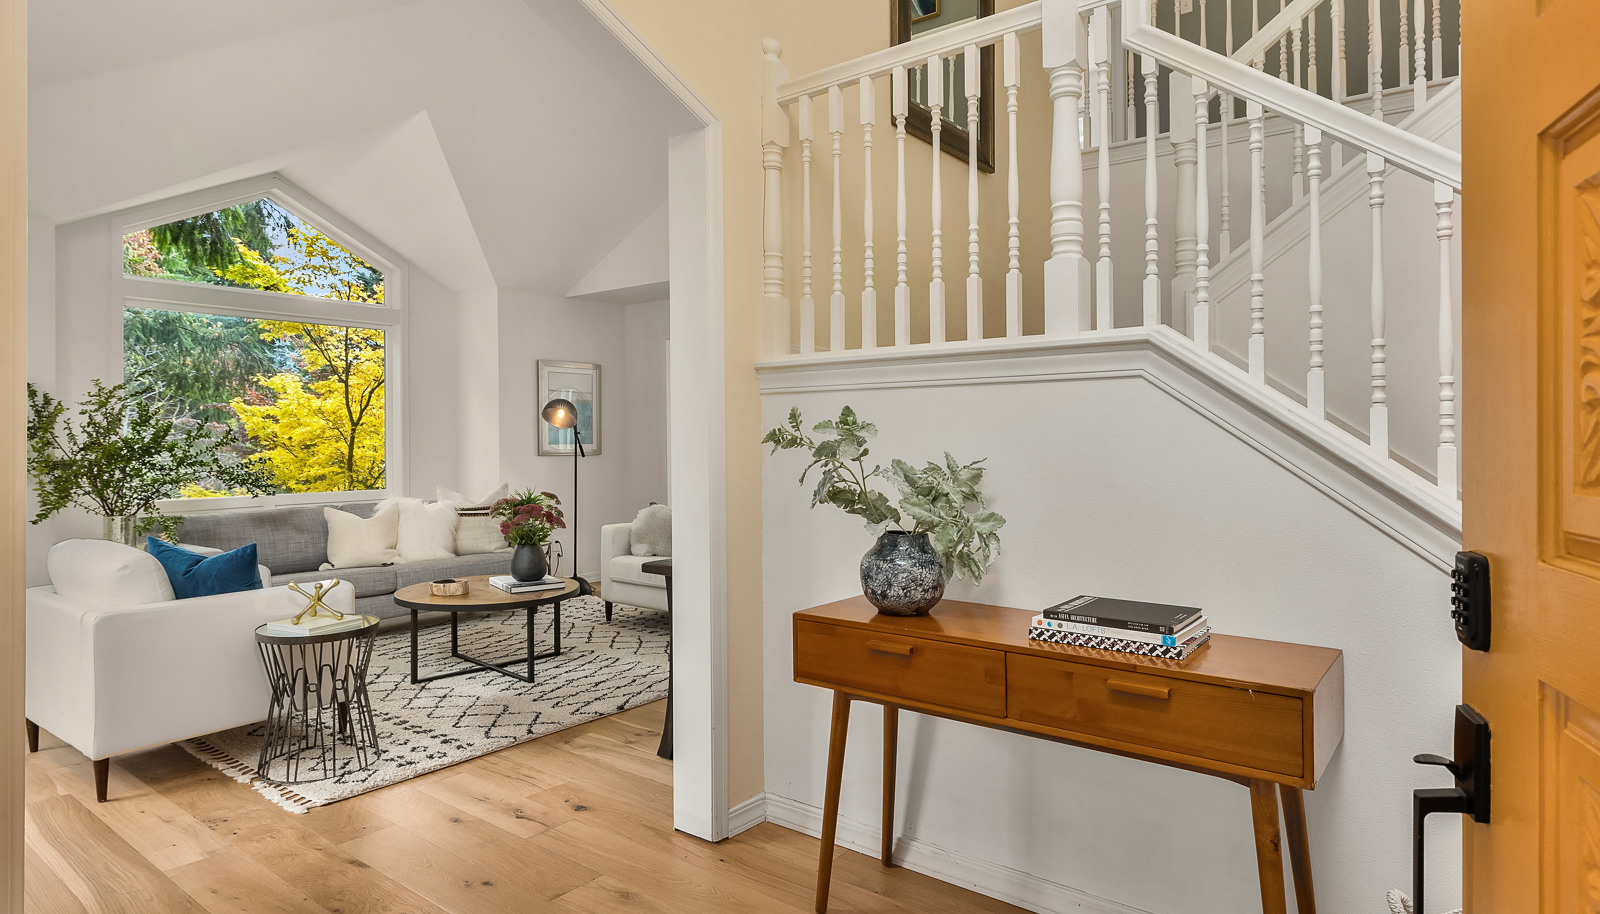 Entryway is bright and inviting.